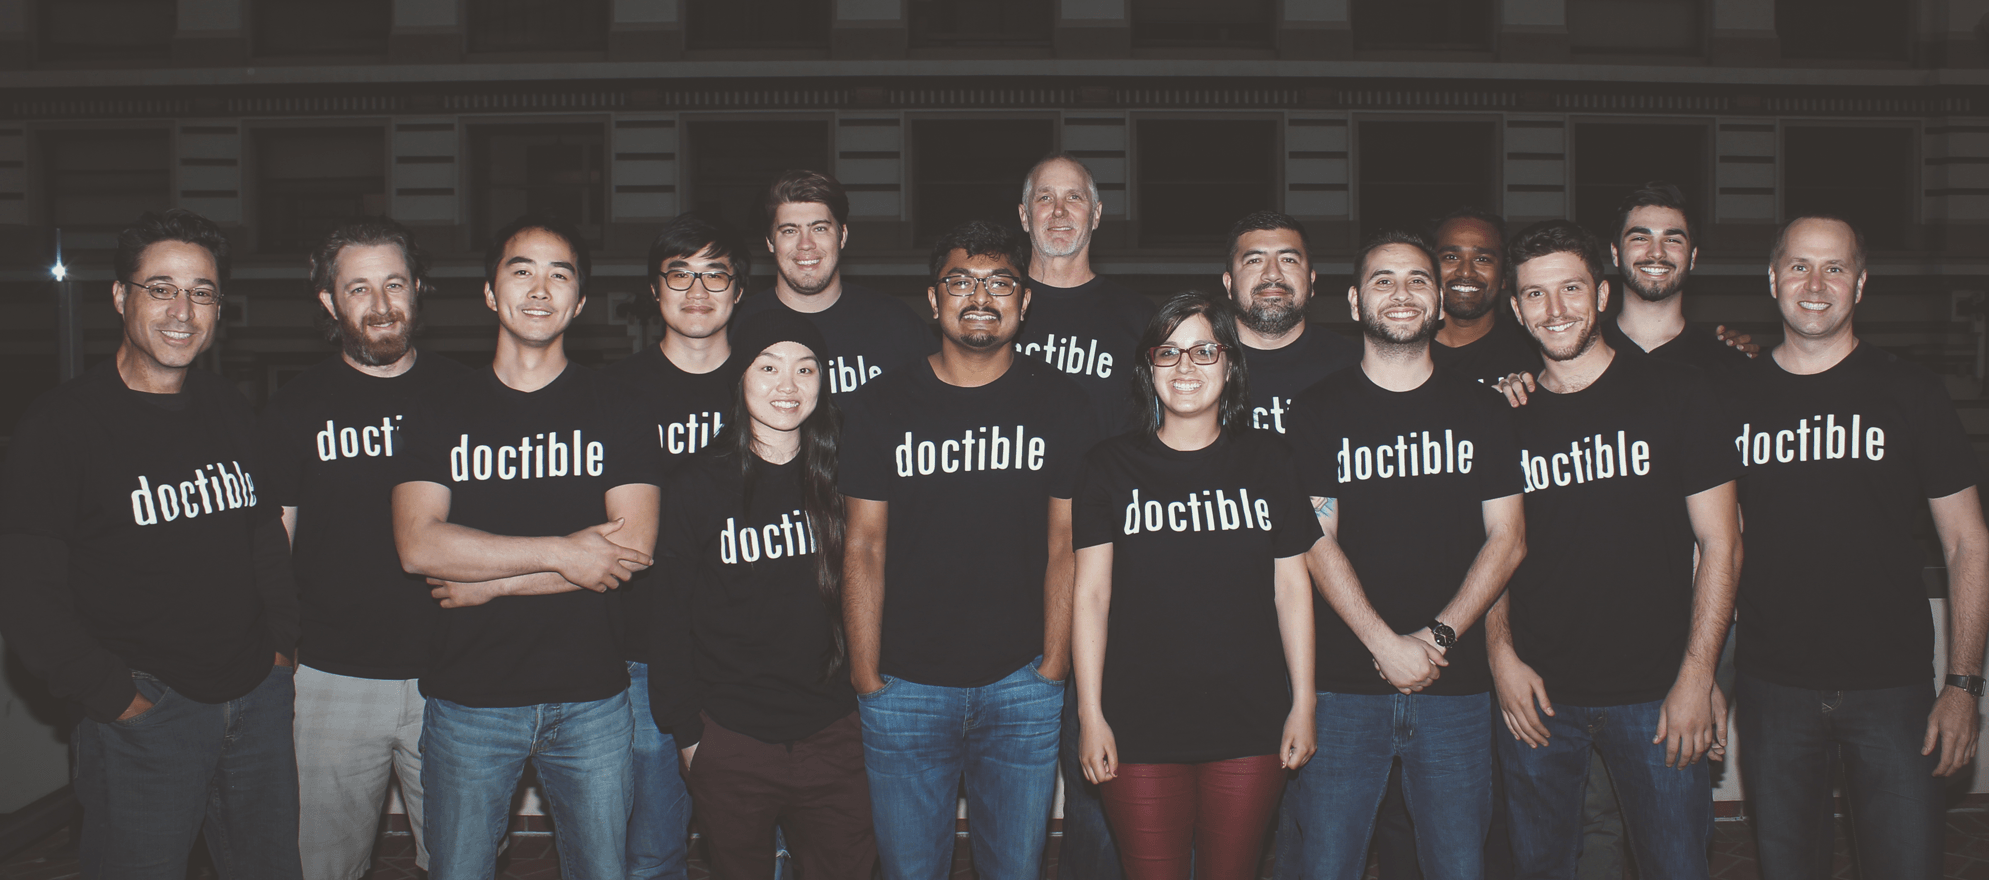 The Doctible team, including their brand-new Vice President of Sales Steve Weber.